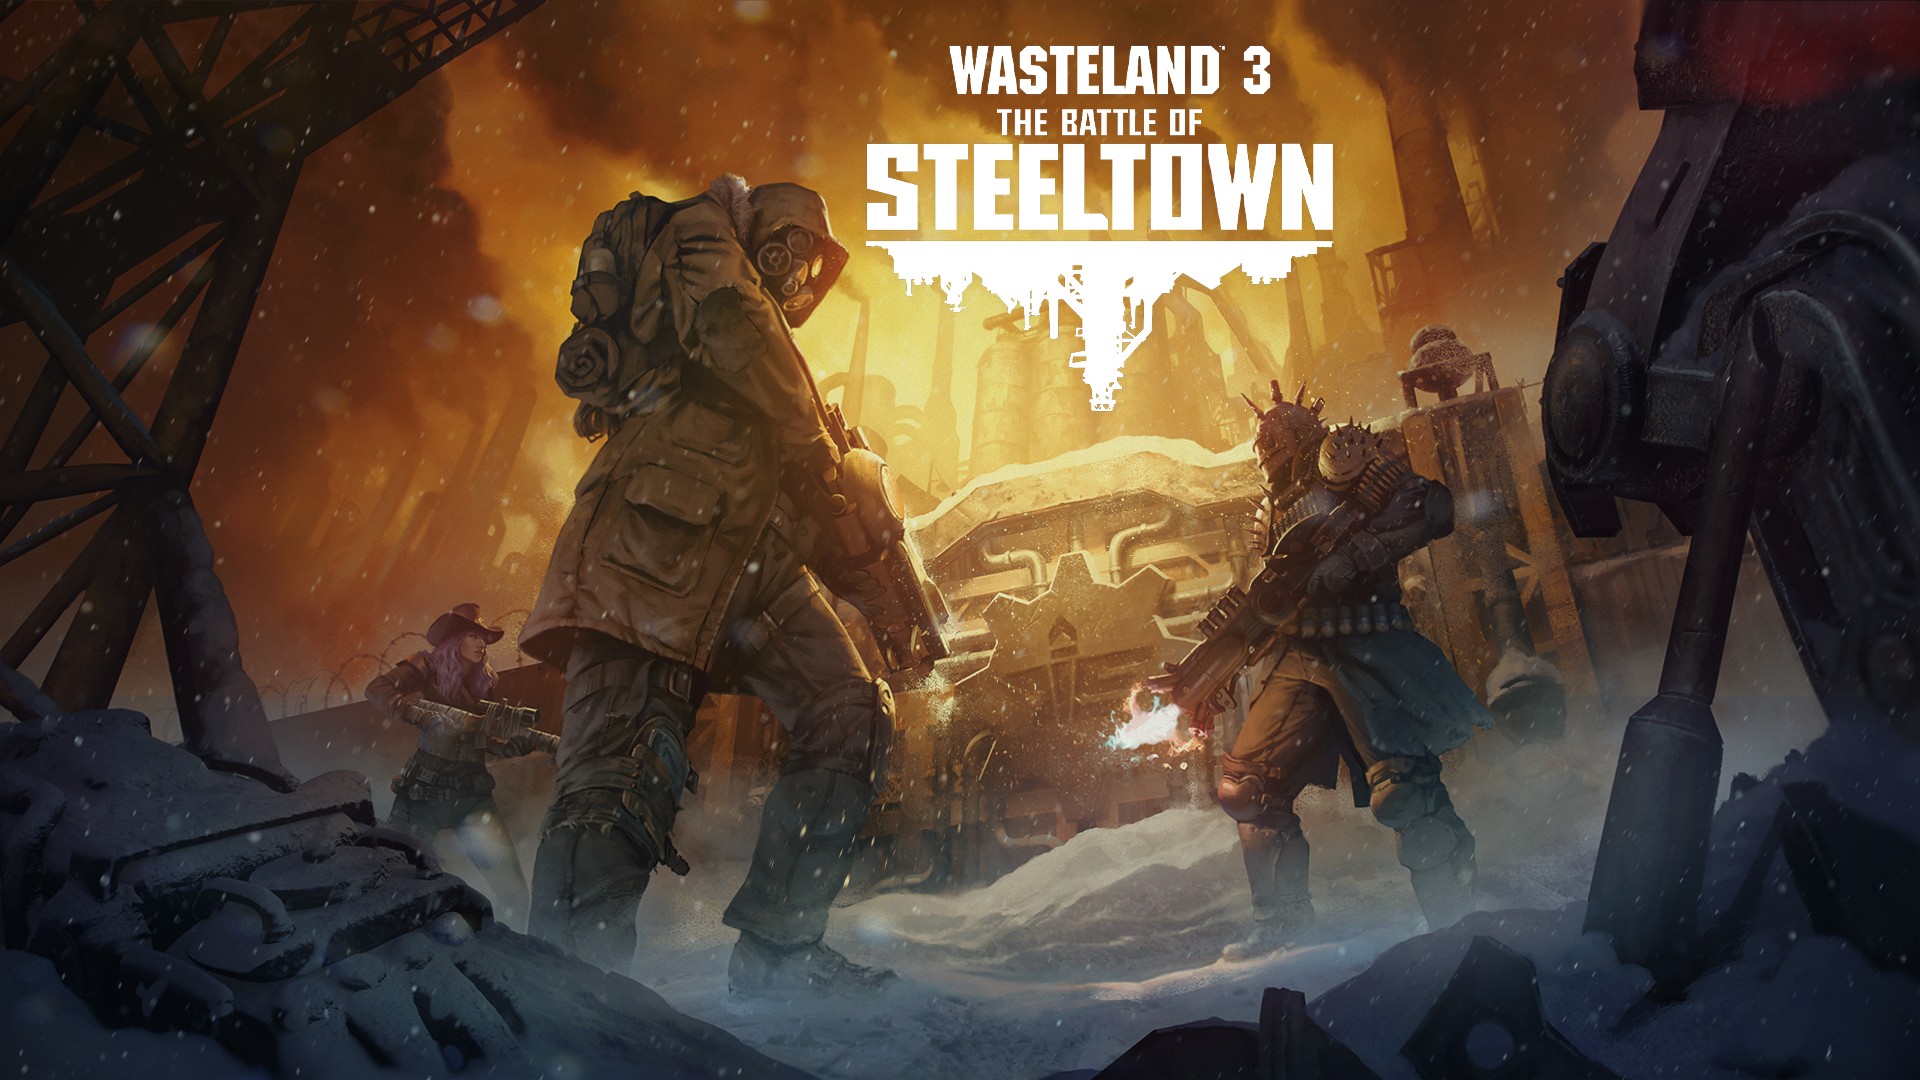 Video For Wasteland 3: The Battle of Steeltown Now Available